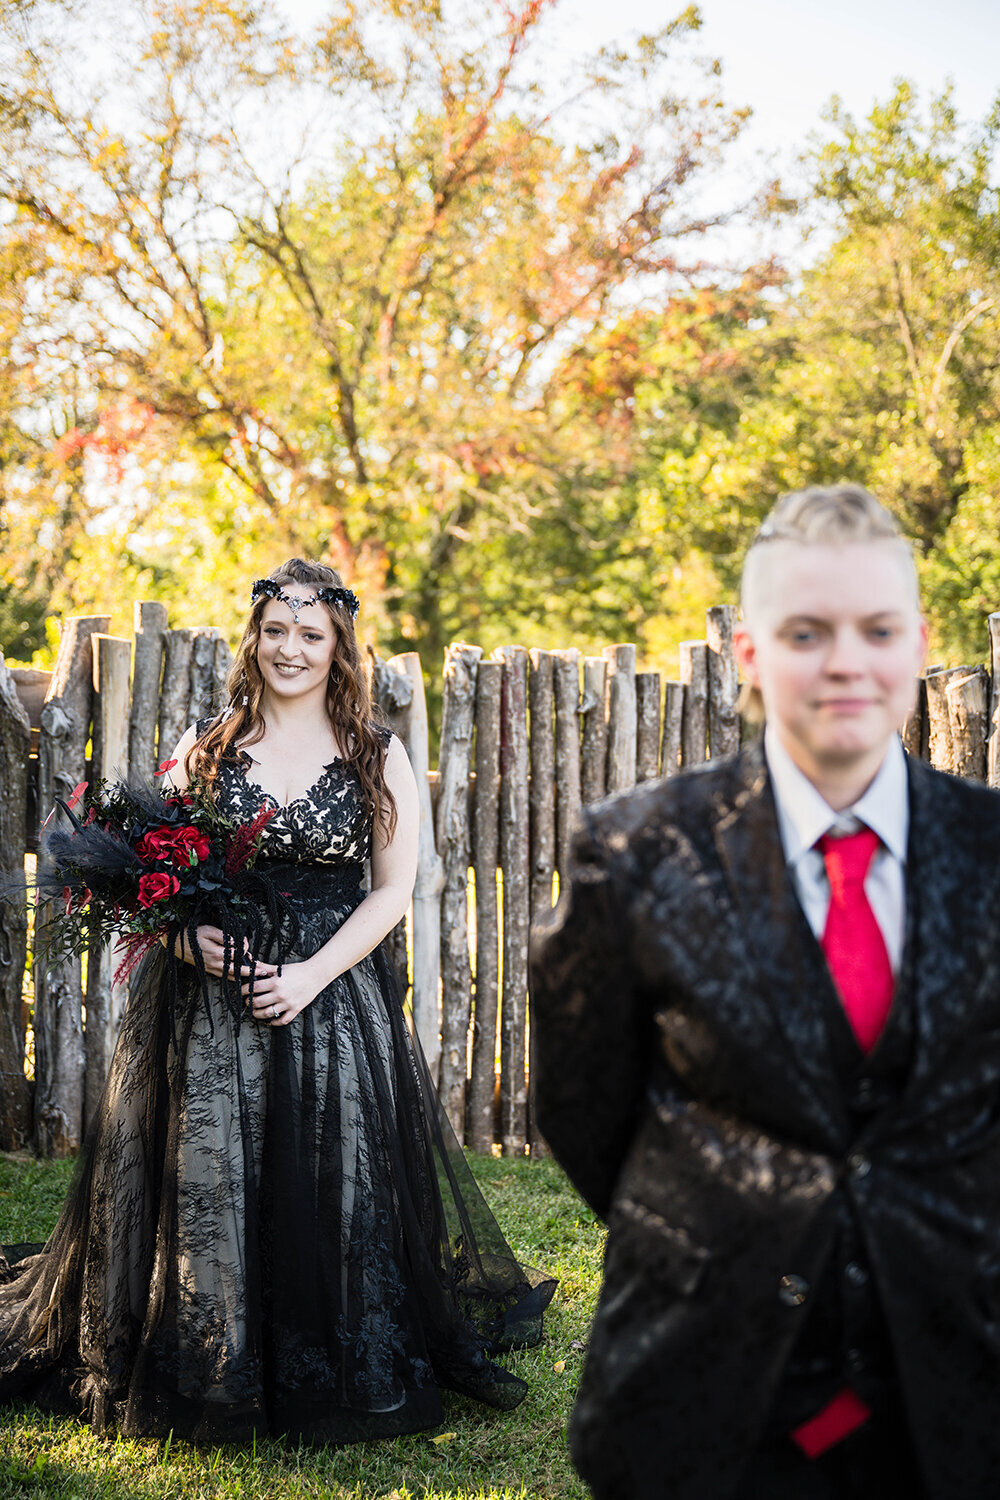 Two LGBTQ+ brides stand in the backyard of an Airbnb they rented in Roanoke, Virginia on their elopement. One bride, dressed in a black floral suit, stands in front of another bride, who is wearing a black dress. The bride in the foreground is purposefully out of focus to focus on the bride in the background who is smiling as they wait for their first look moment.